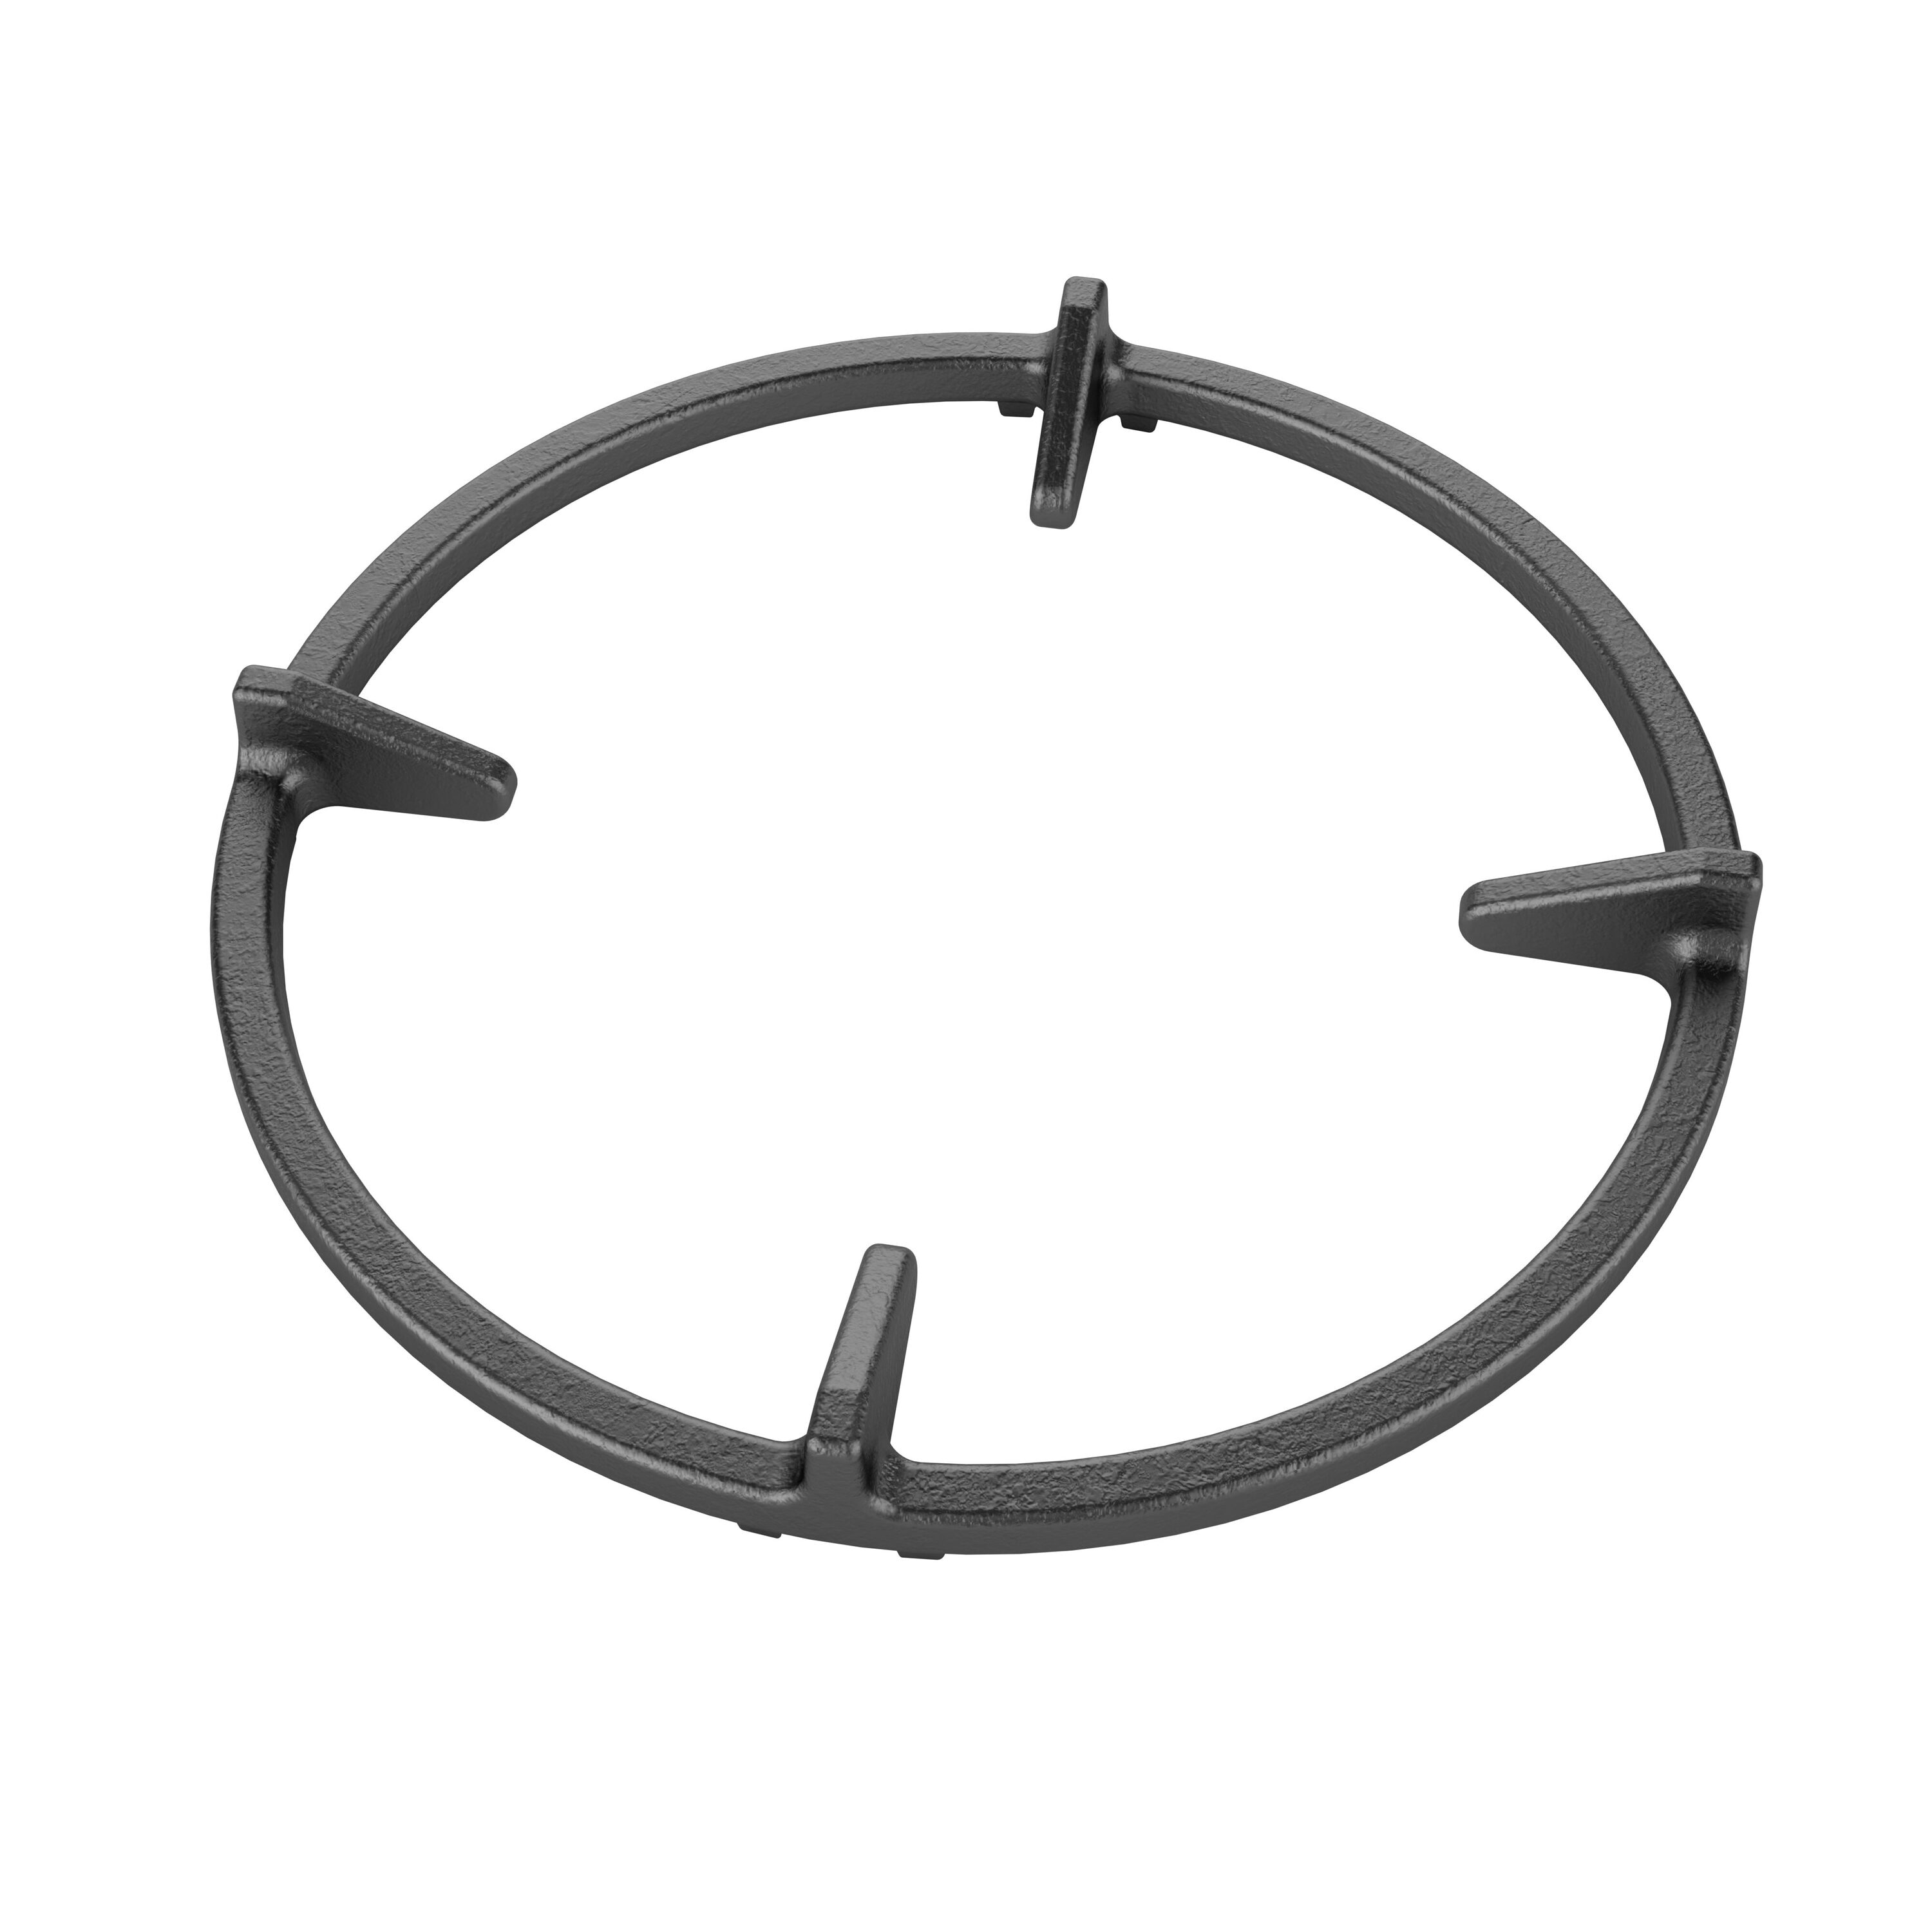 Generic BQMAX Cast Iron Wok Ring Replacement Parts for Gas Stove GE,  Whirlpool WEG750h0hz Gas Stove Parts, Wok Rack for Kitchenaid KSDB